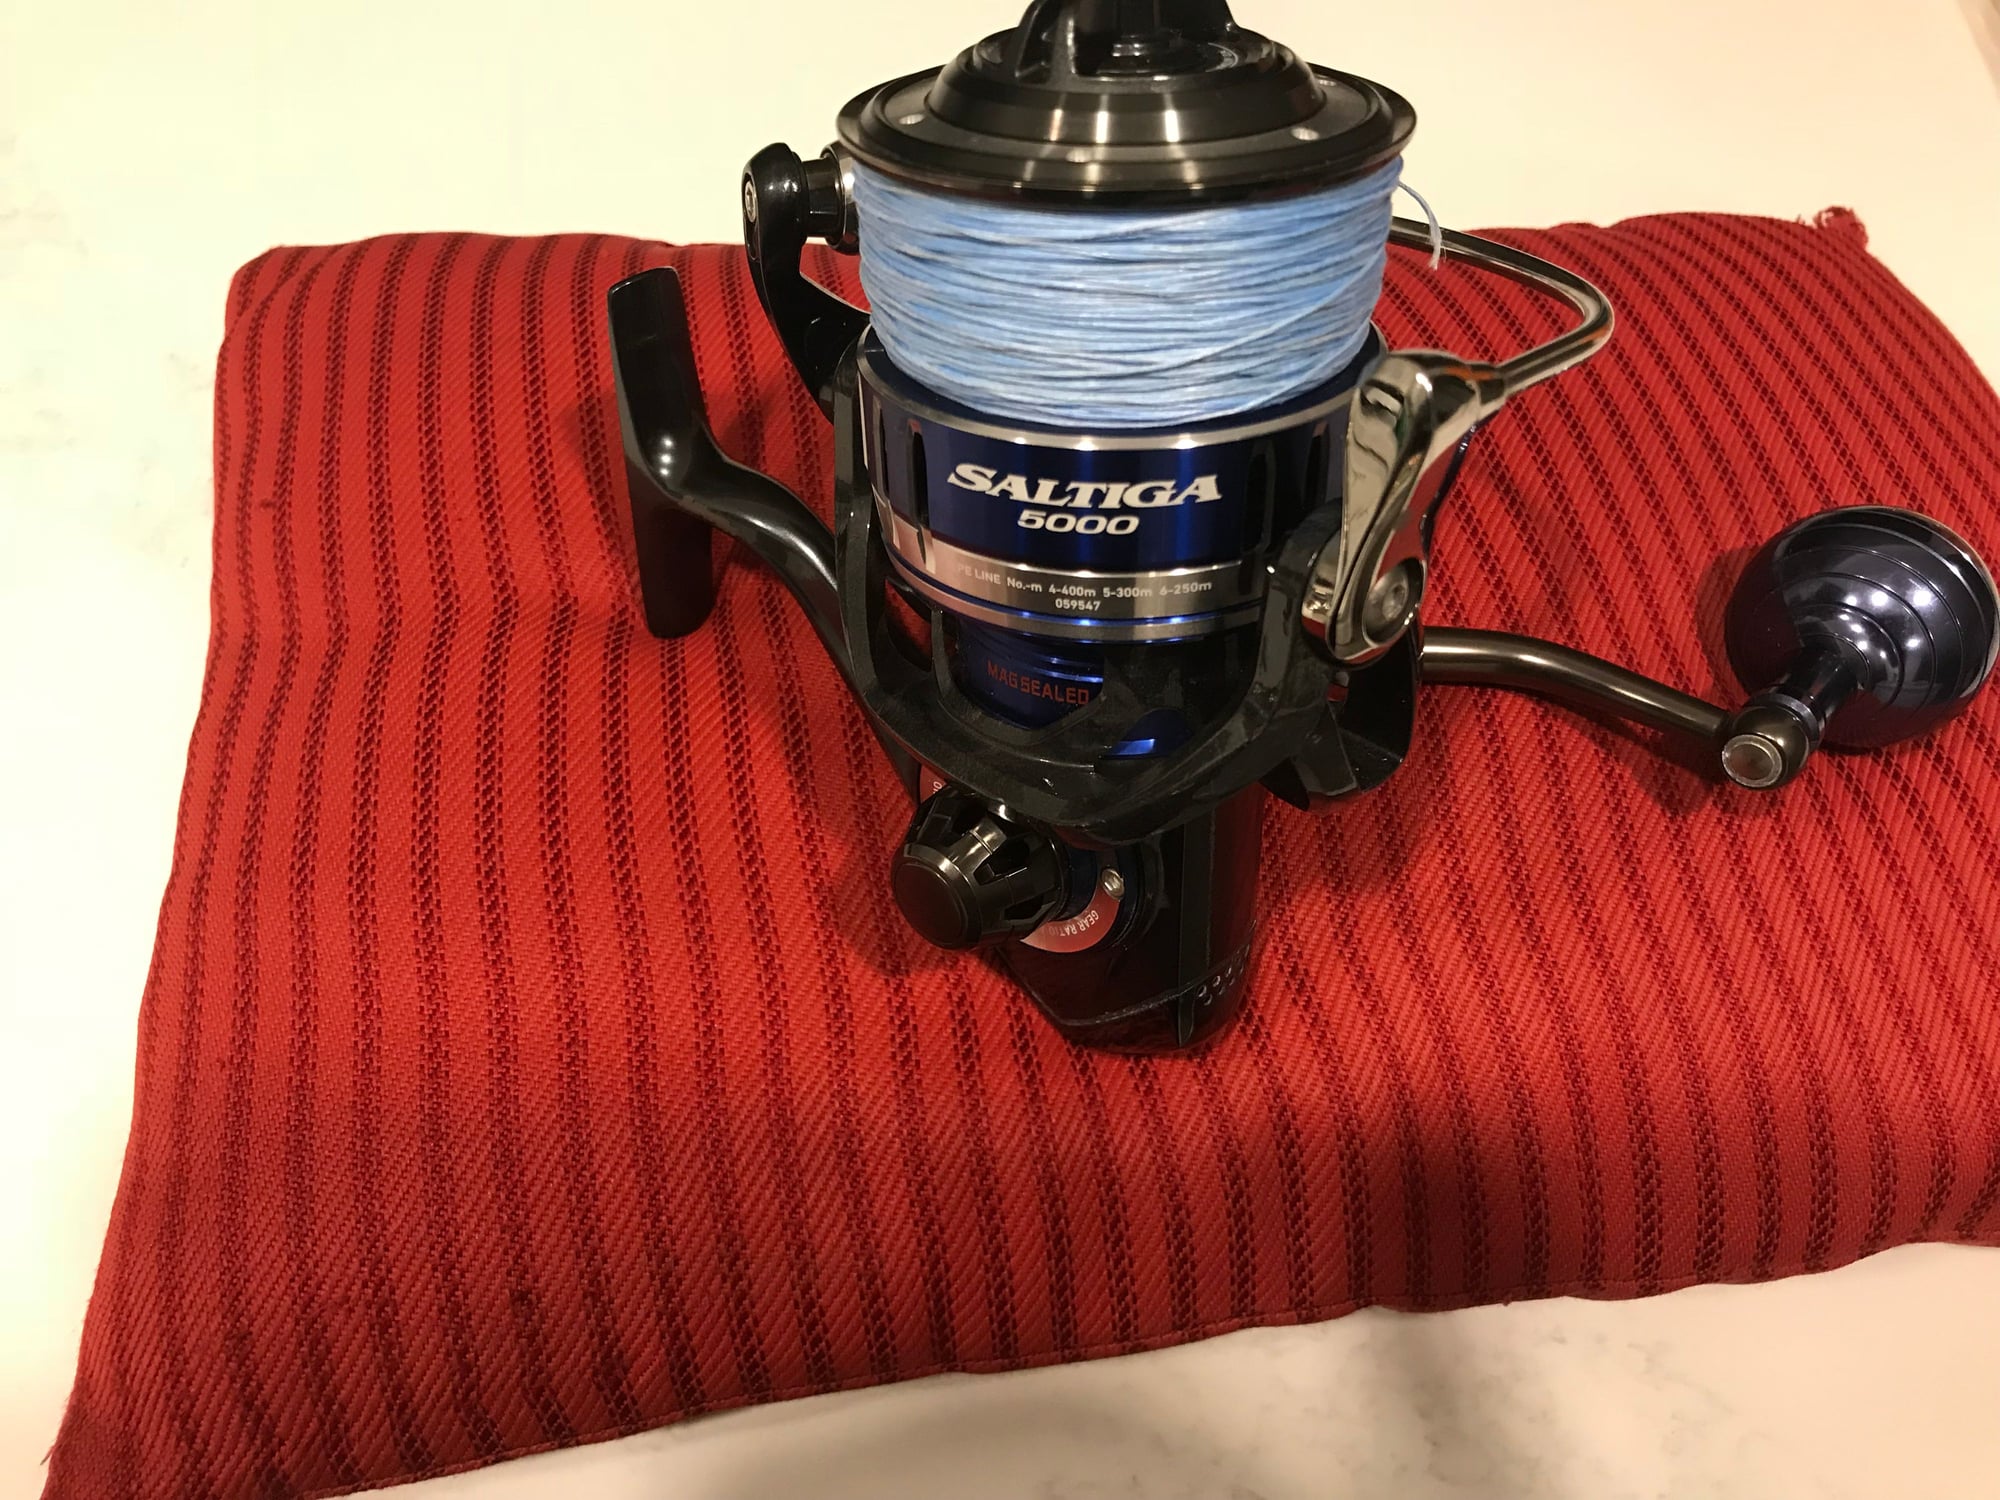 Daiwa Saltiga 5000 Spinning Reel used twice FOR SALE!! - The Hull Truth -  Boating and Fishing Forum